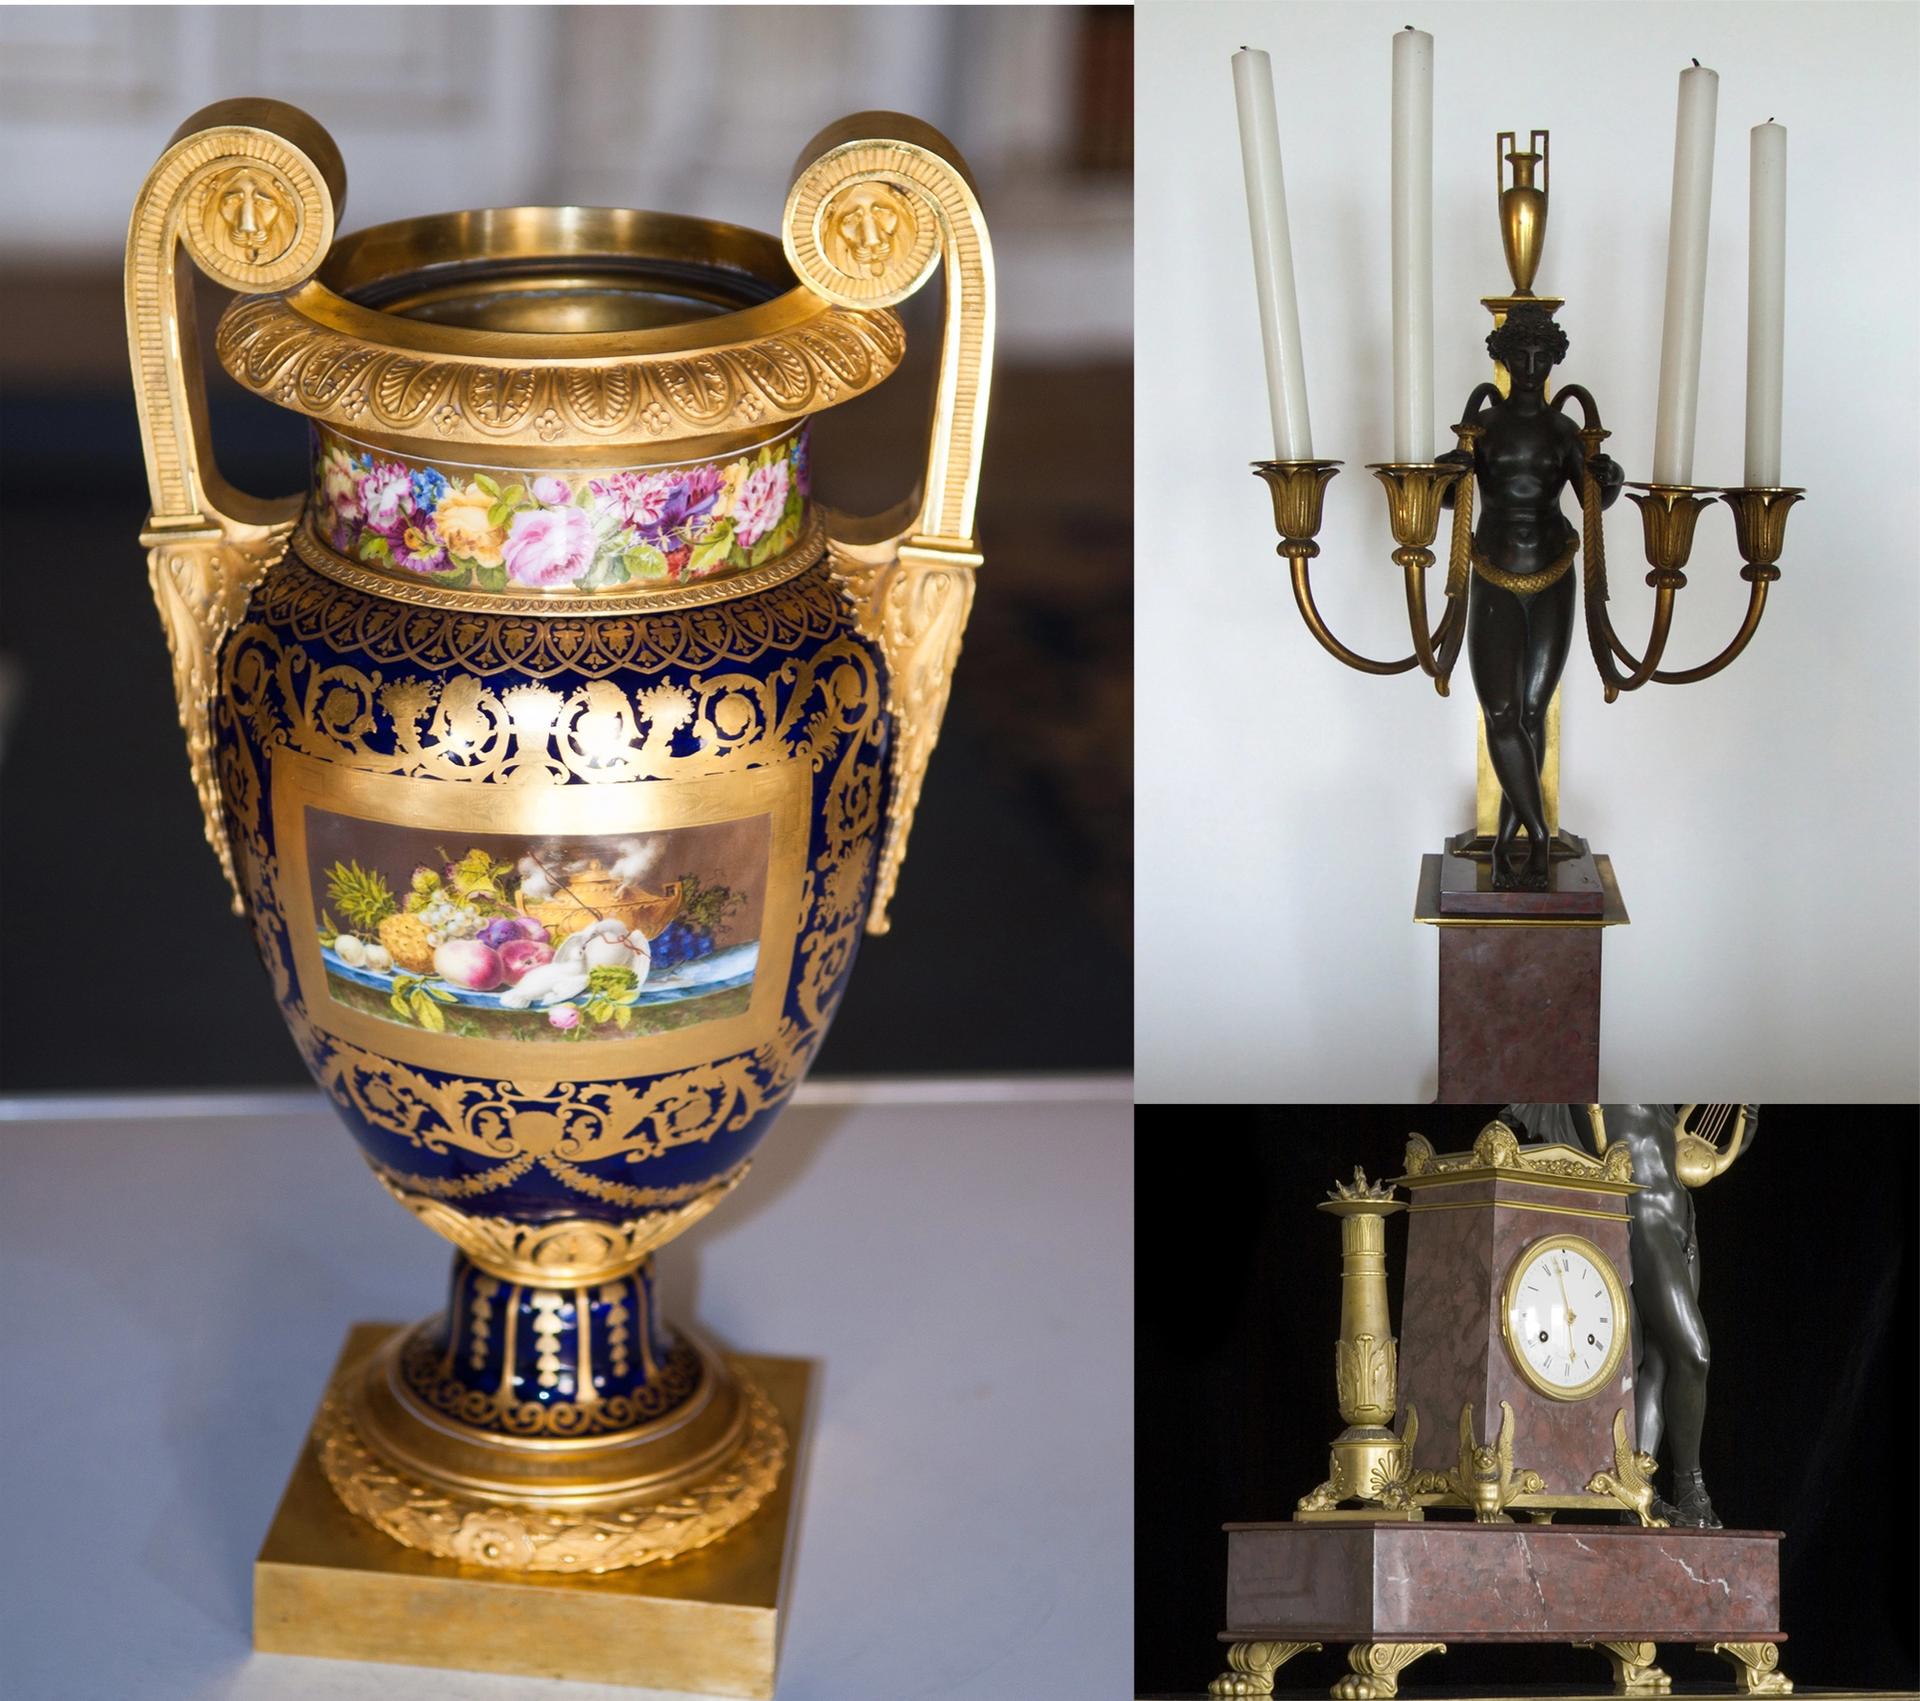 A pair of Sèvres vases, two candelabras and clock with figure of Apollo were among the objects taken from Uppark © National Trust, Andrew Fetherston